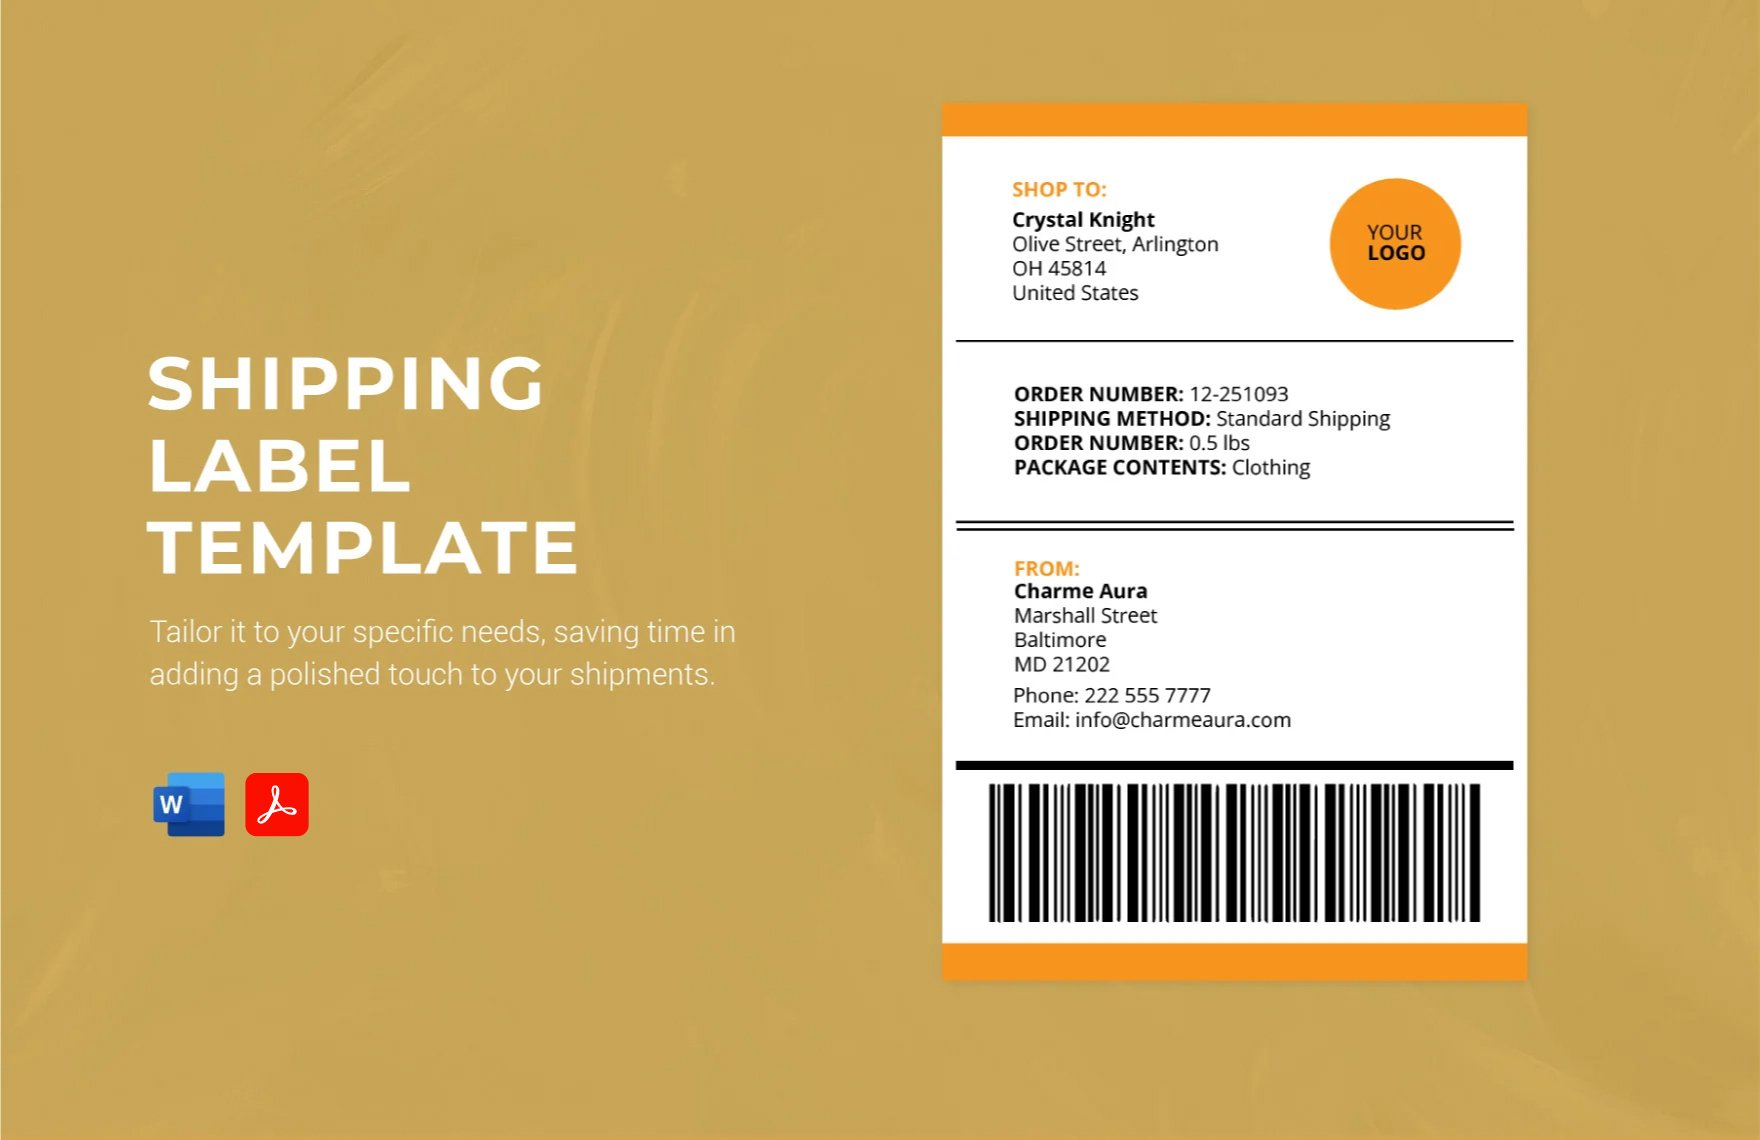 Shipping Label Template in Word, PDF